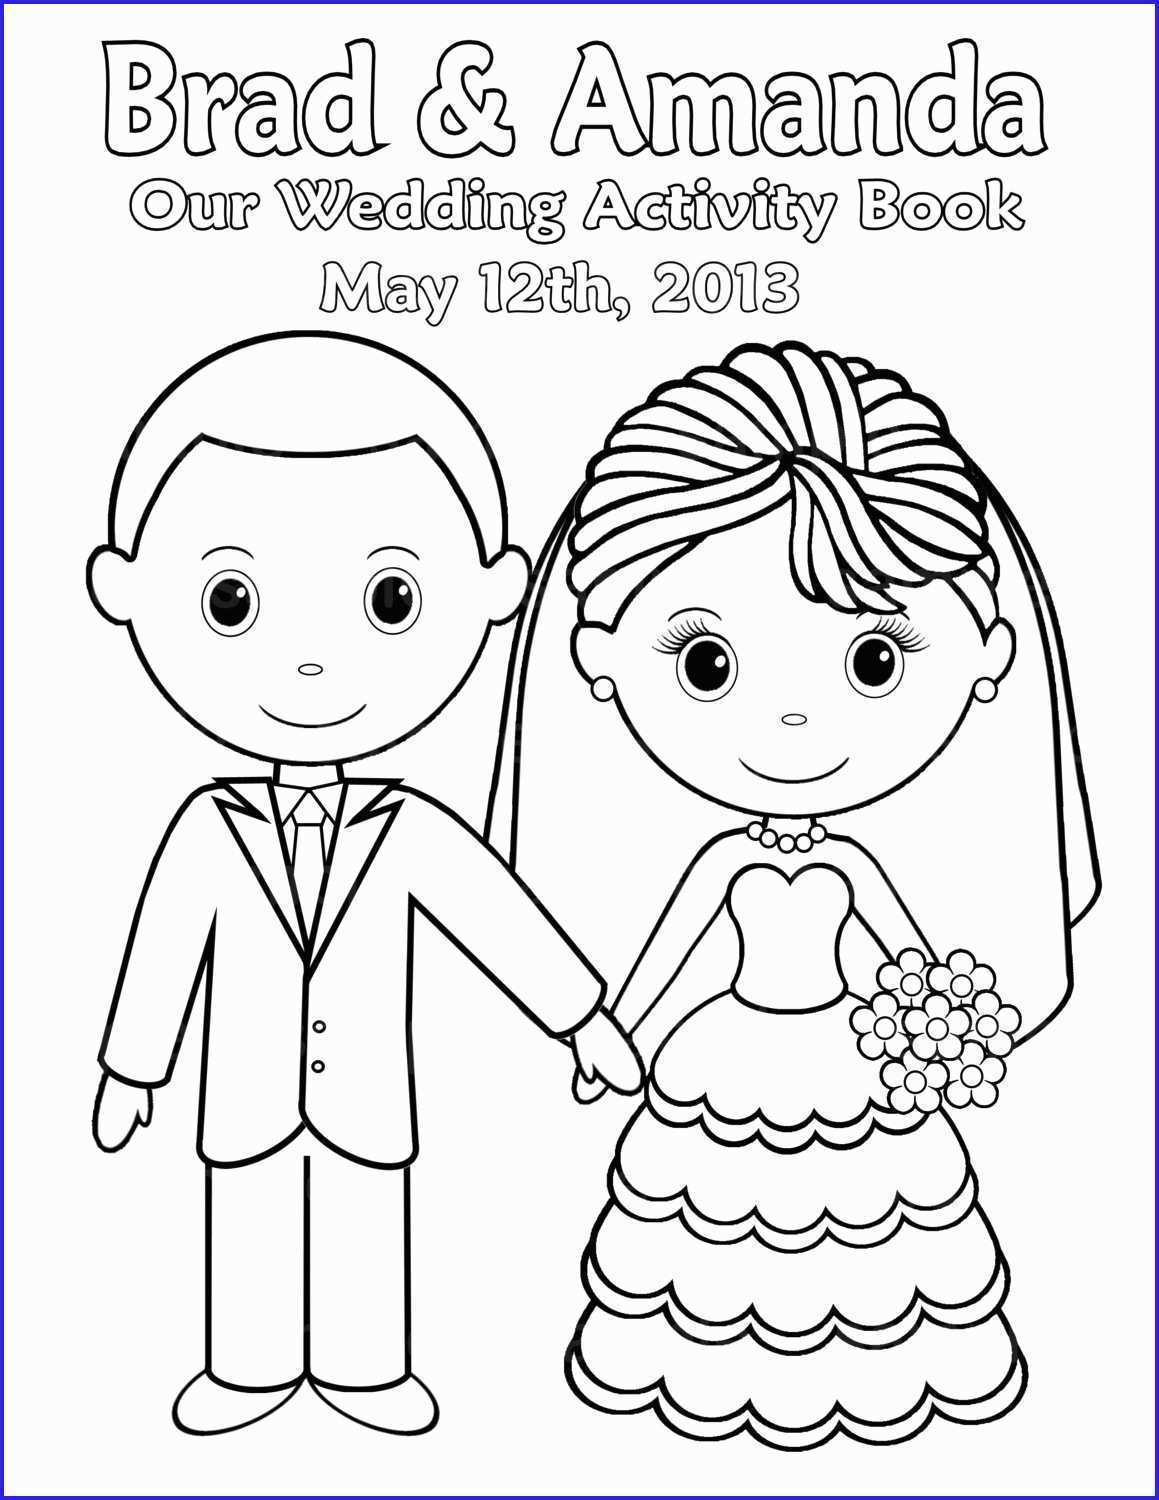 Coloring Pages : Custom Coloring Books From Photos Luxury Free - Free Printable Personalized Children&amp;#039;s Books